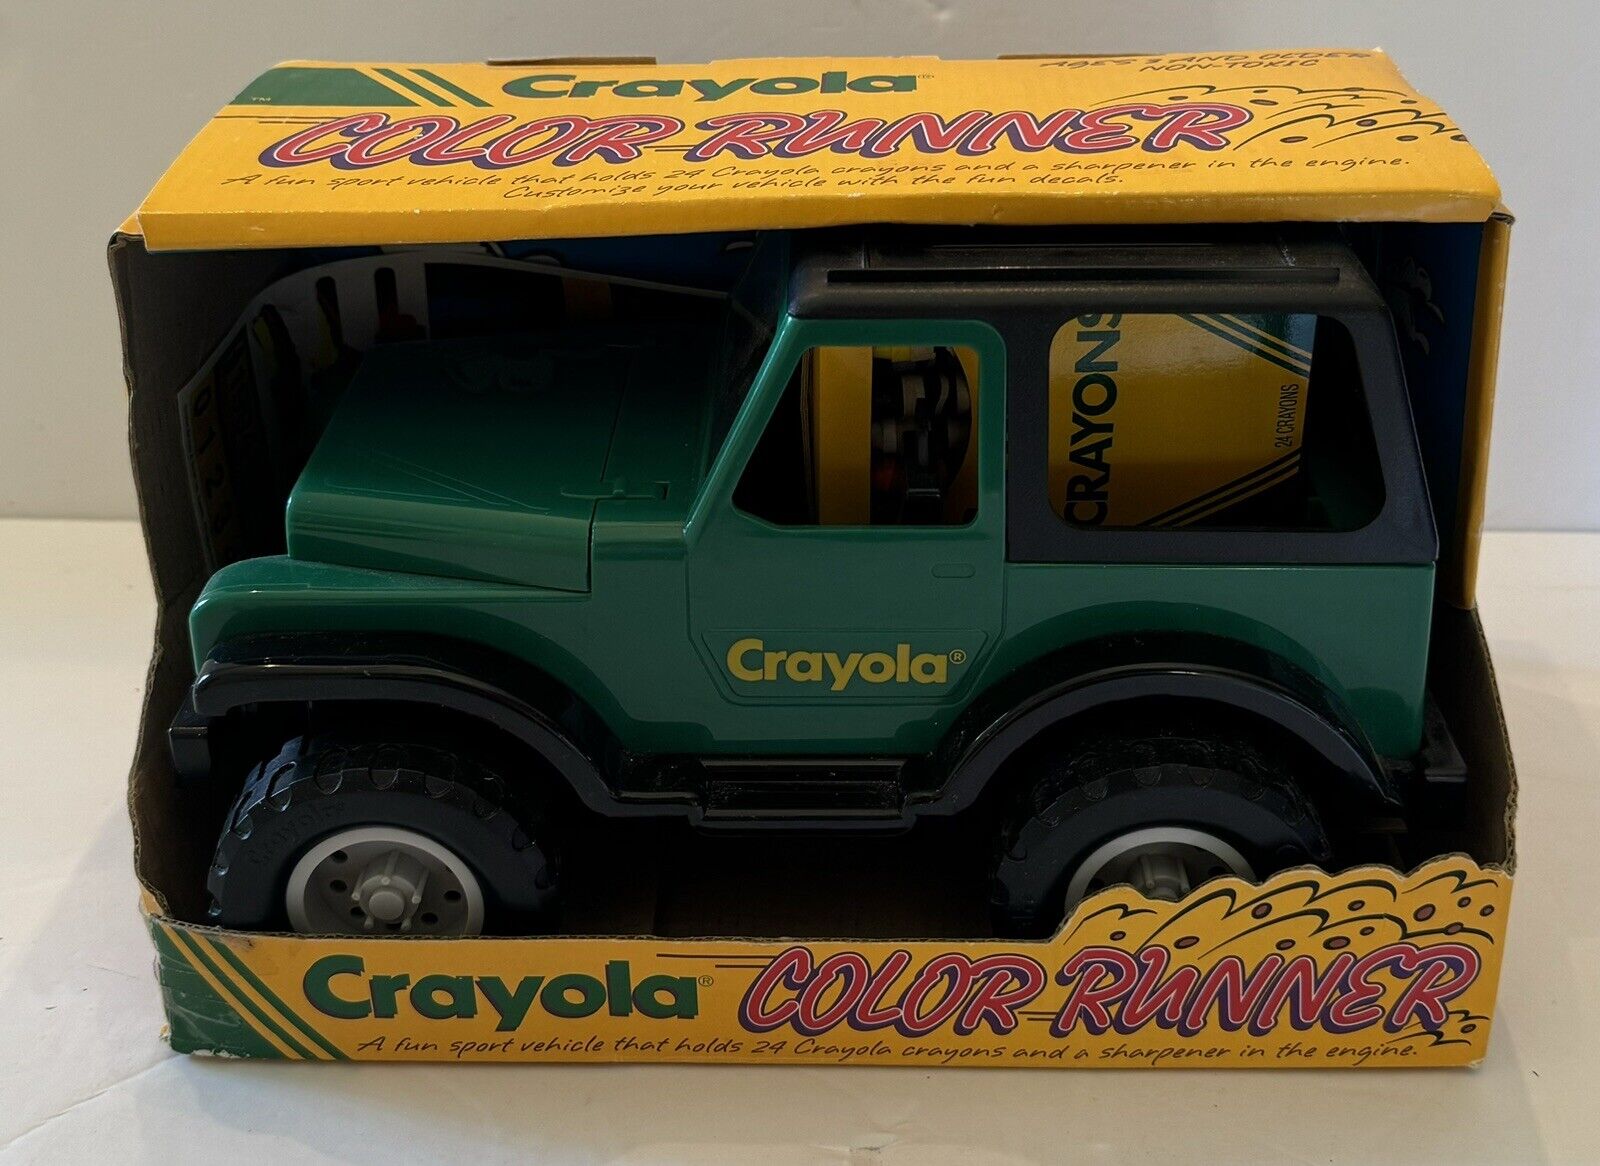 Crayola Crayons Color Runner Green Limited Edition Collectible 1994 - New